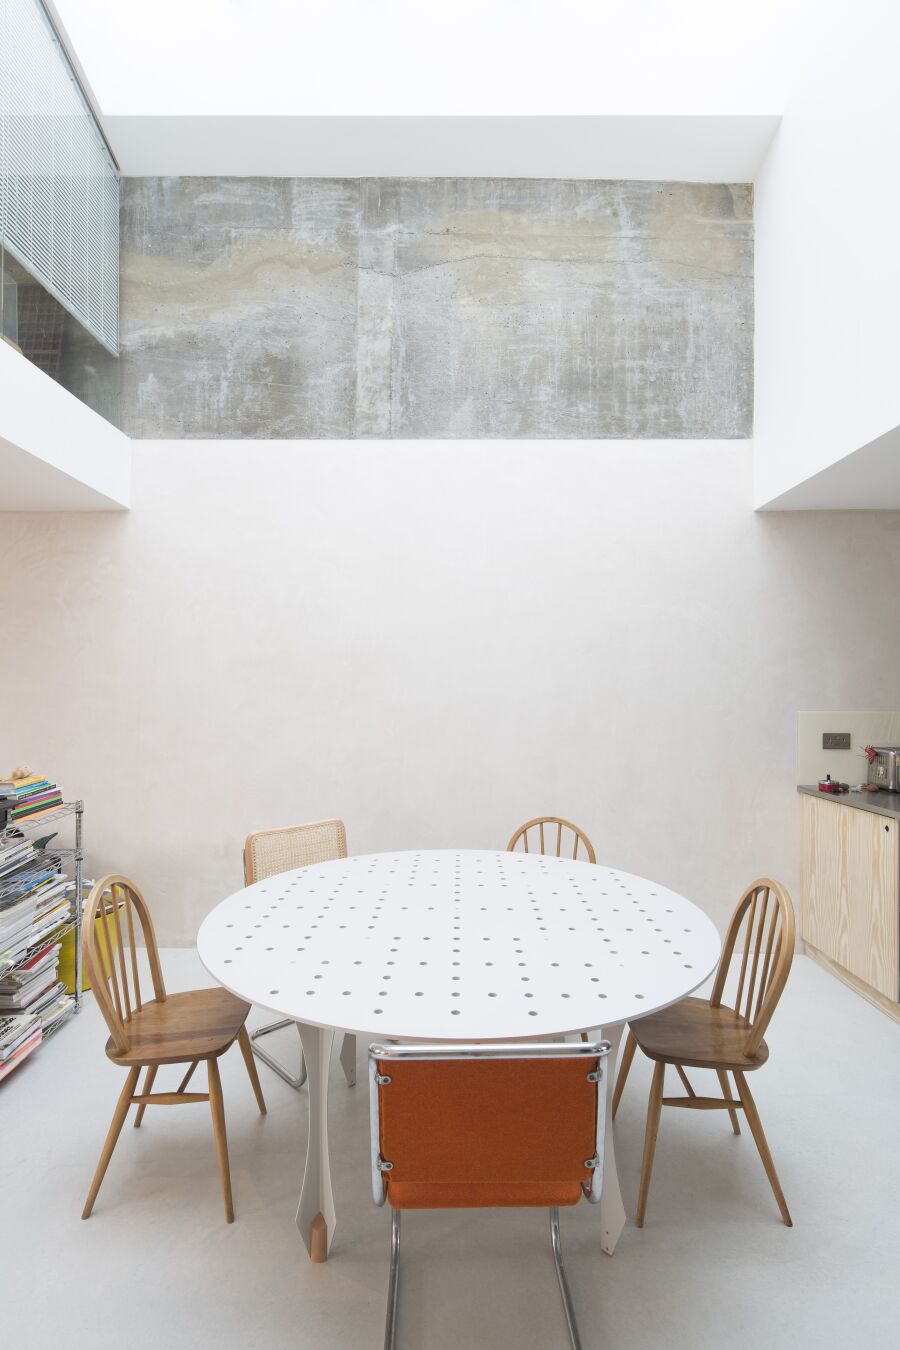 Perforated steel dining table in open plan dining area.